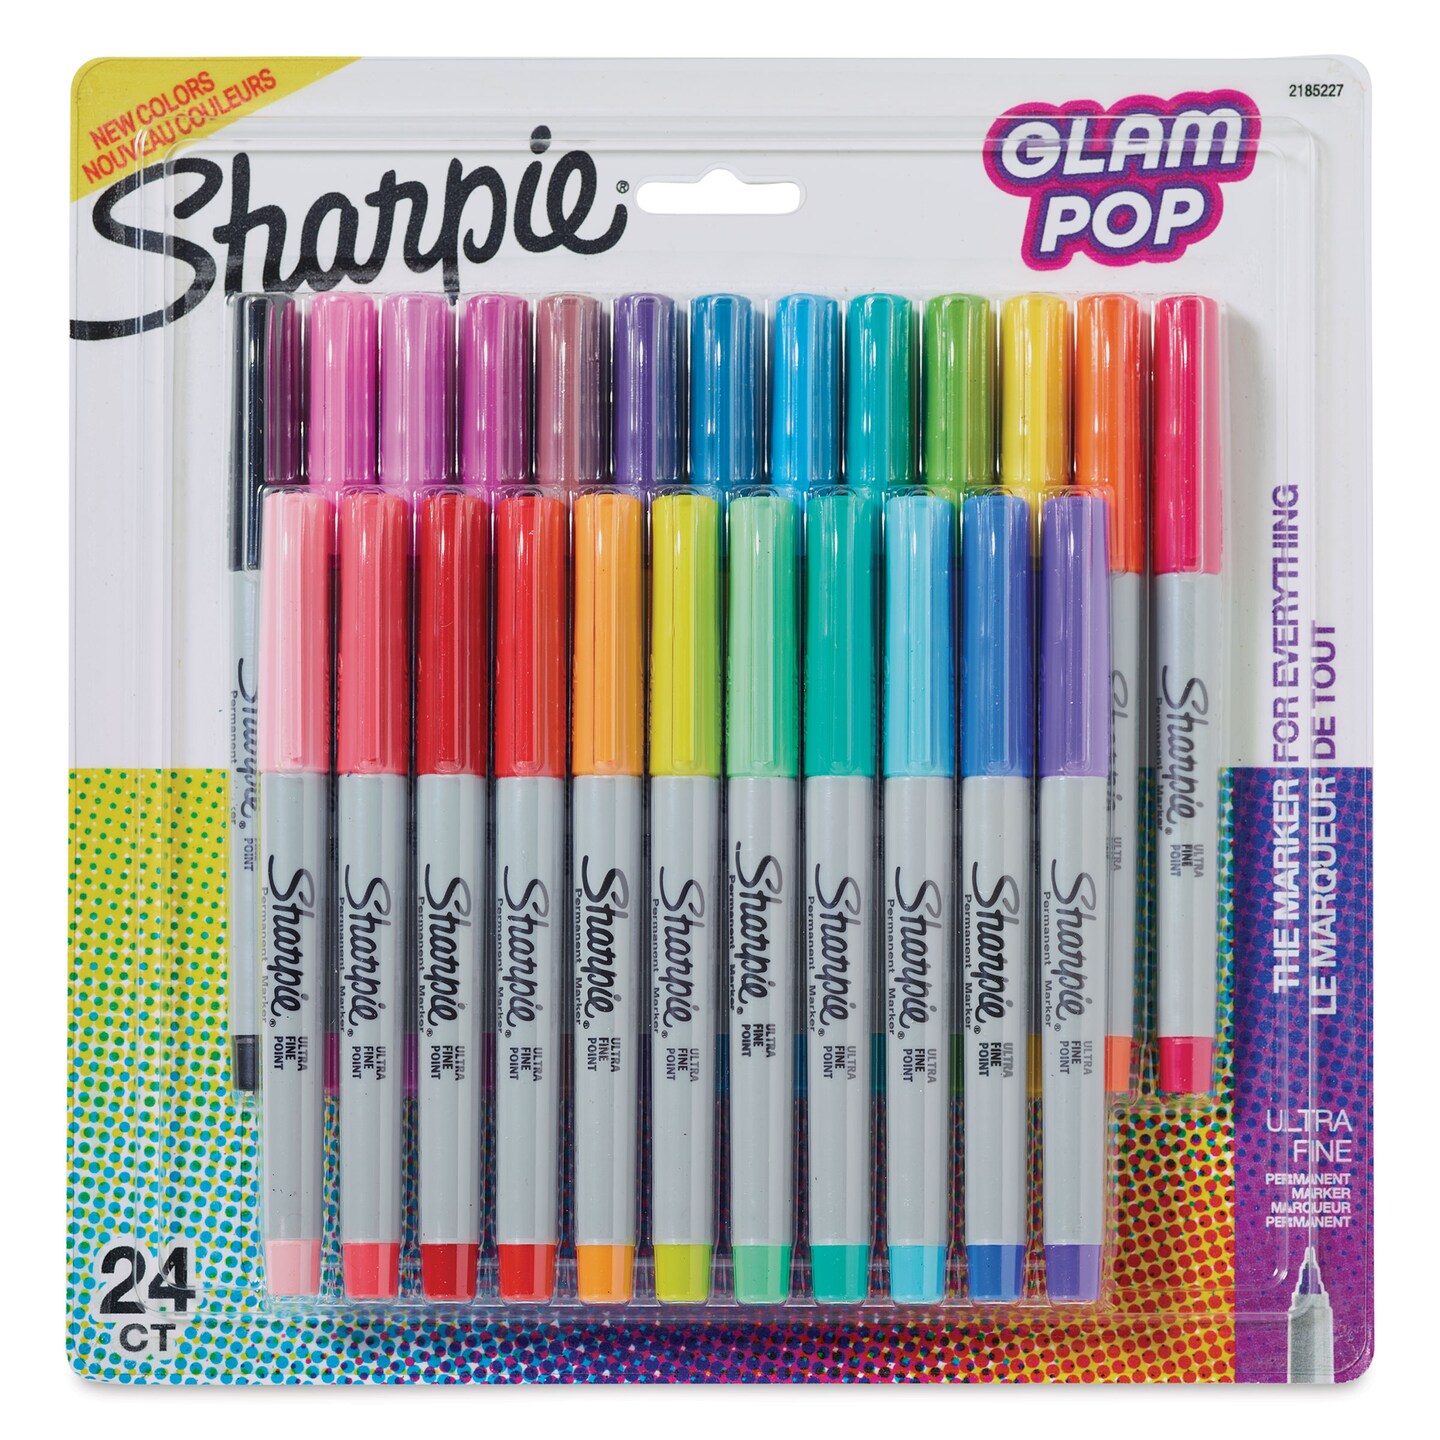 Sharpie Permanent Marker, Ultra Fine Point, Assorted Colors, 24 ct